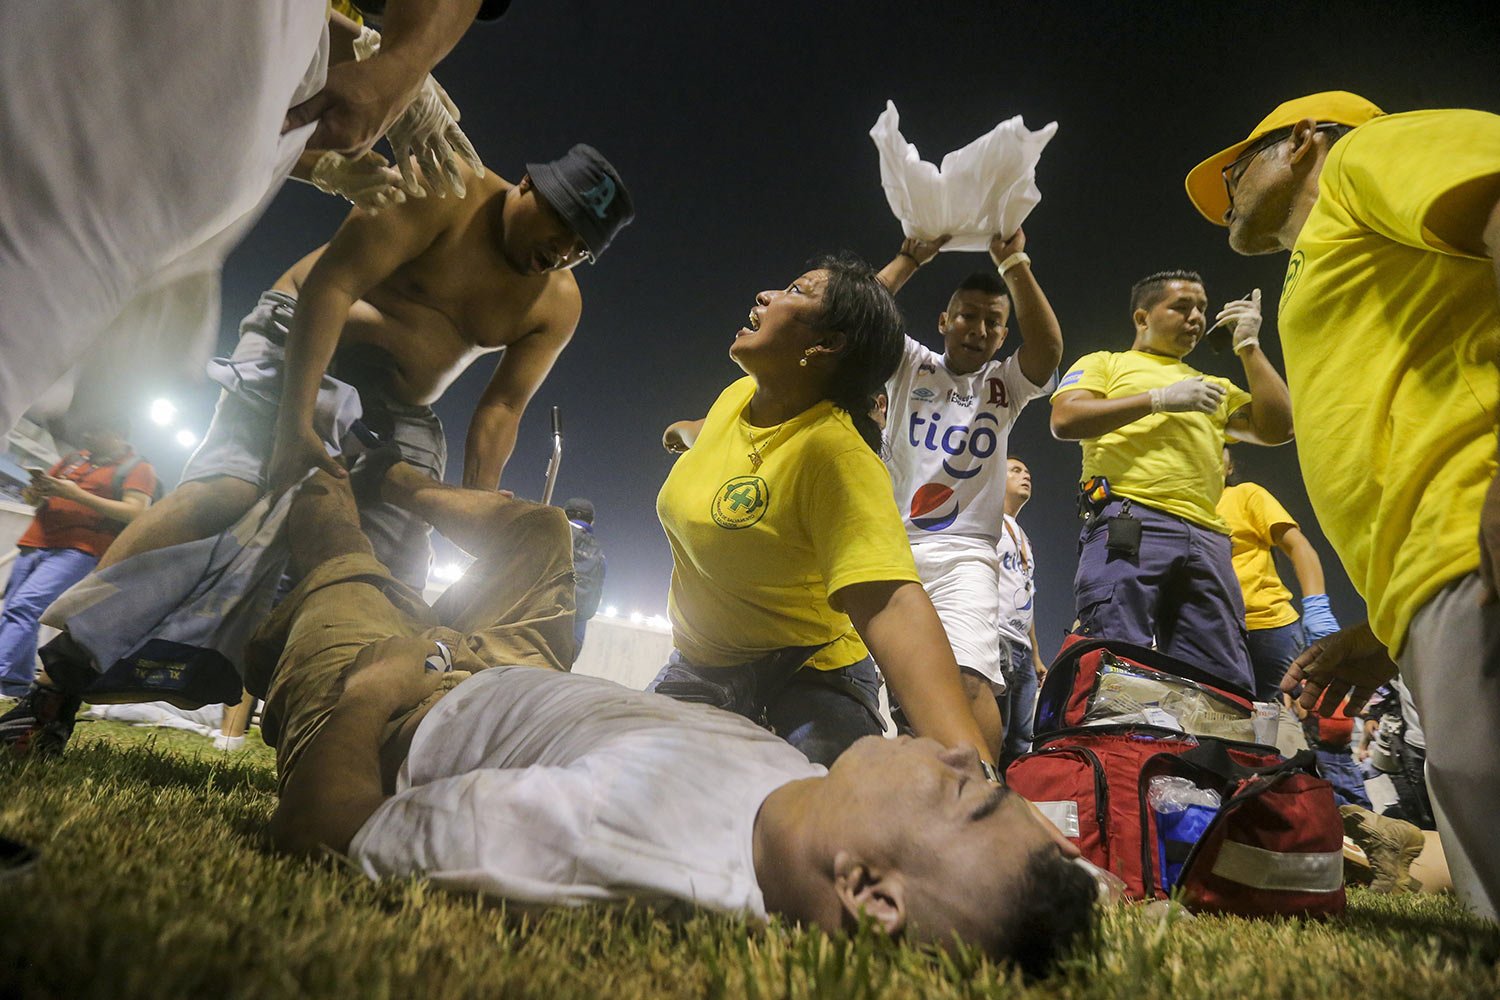  Rescuers treat an injured fan on the field of Cuscatlan stadium in San Salvador, May 20, 2023. At least nine people were killed and dozens injured when stampeding fans pushed through one of the access gates at a quarterfinal Salvadoran league soccer